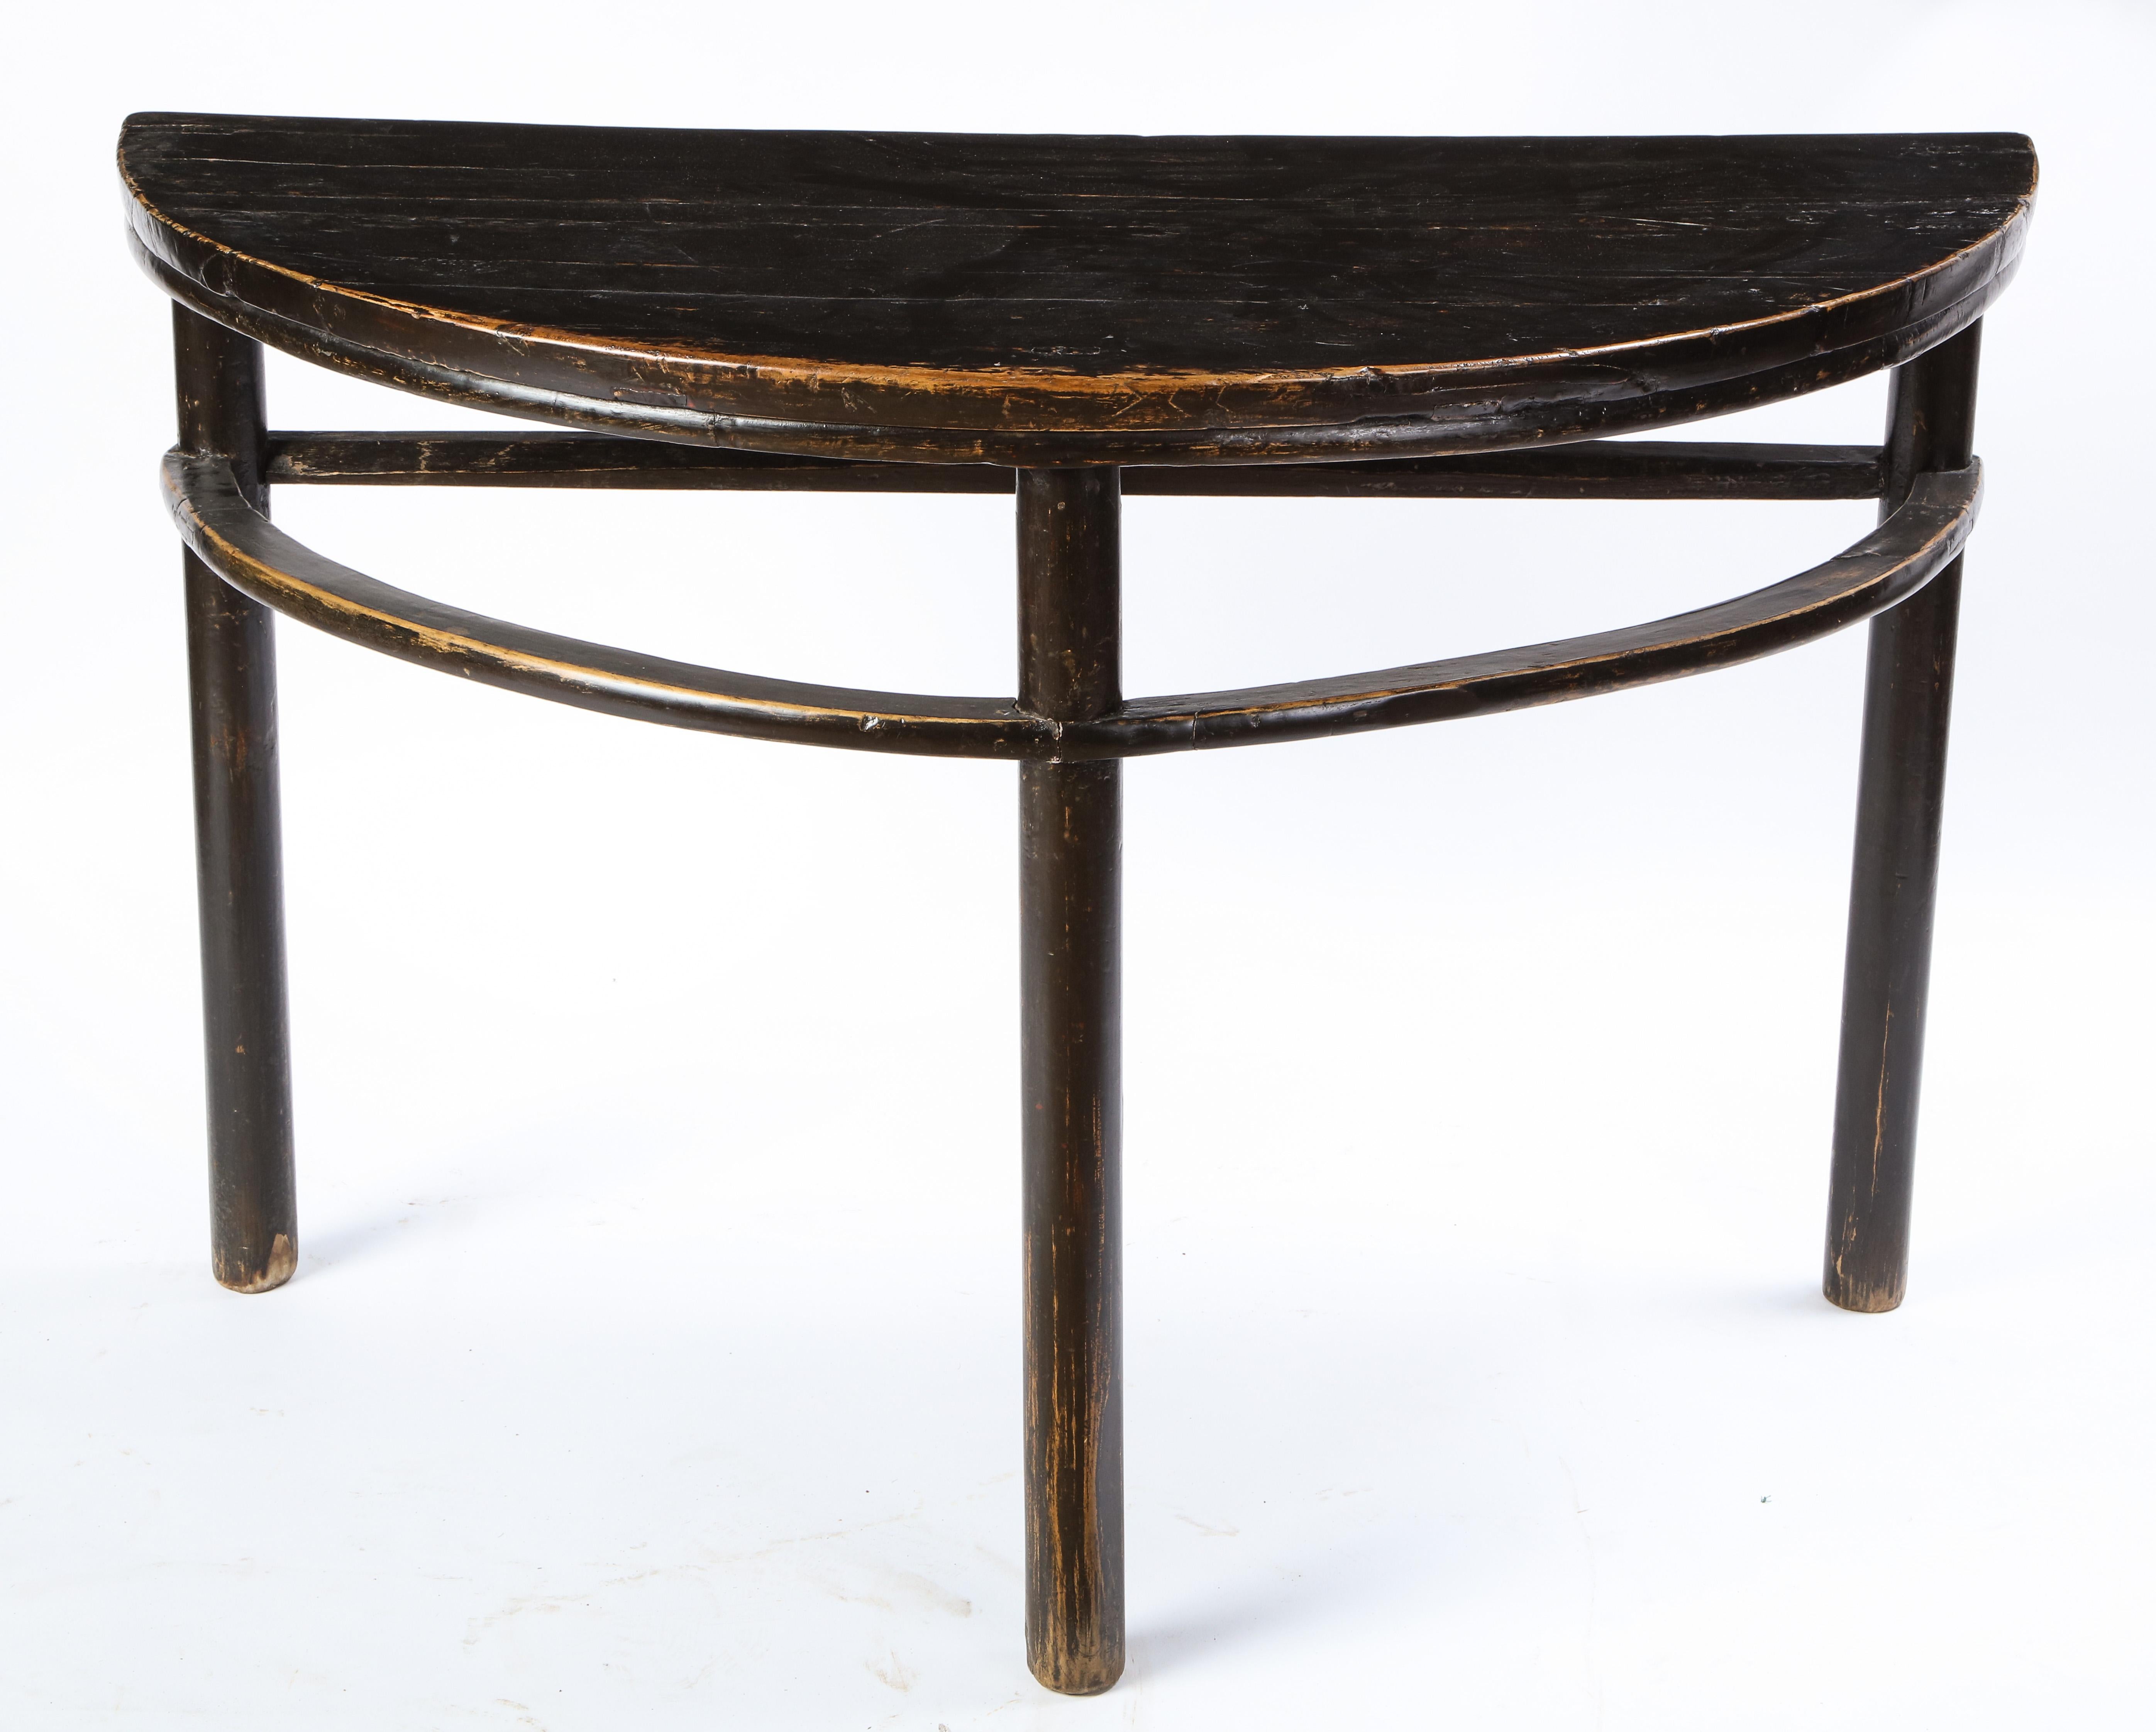 Softwood Pair of Chinese Stained Soft Wood Demilune Side Tables, 20th Century